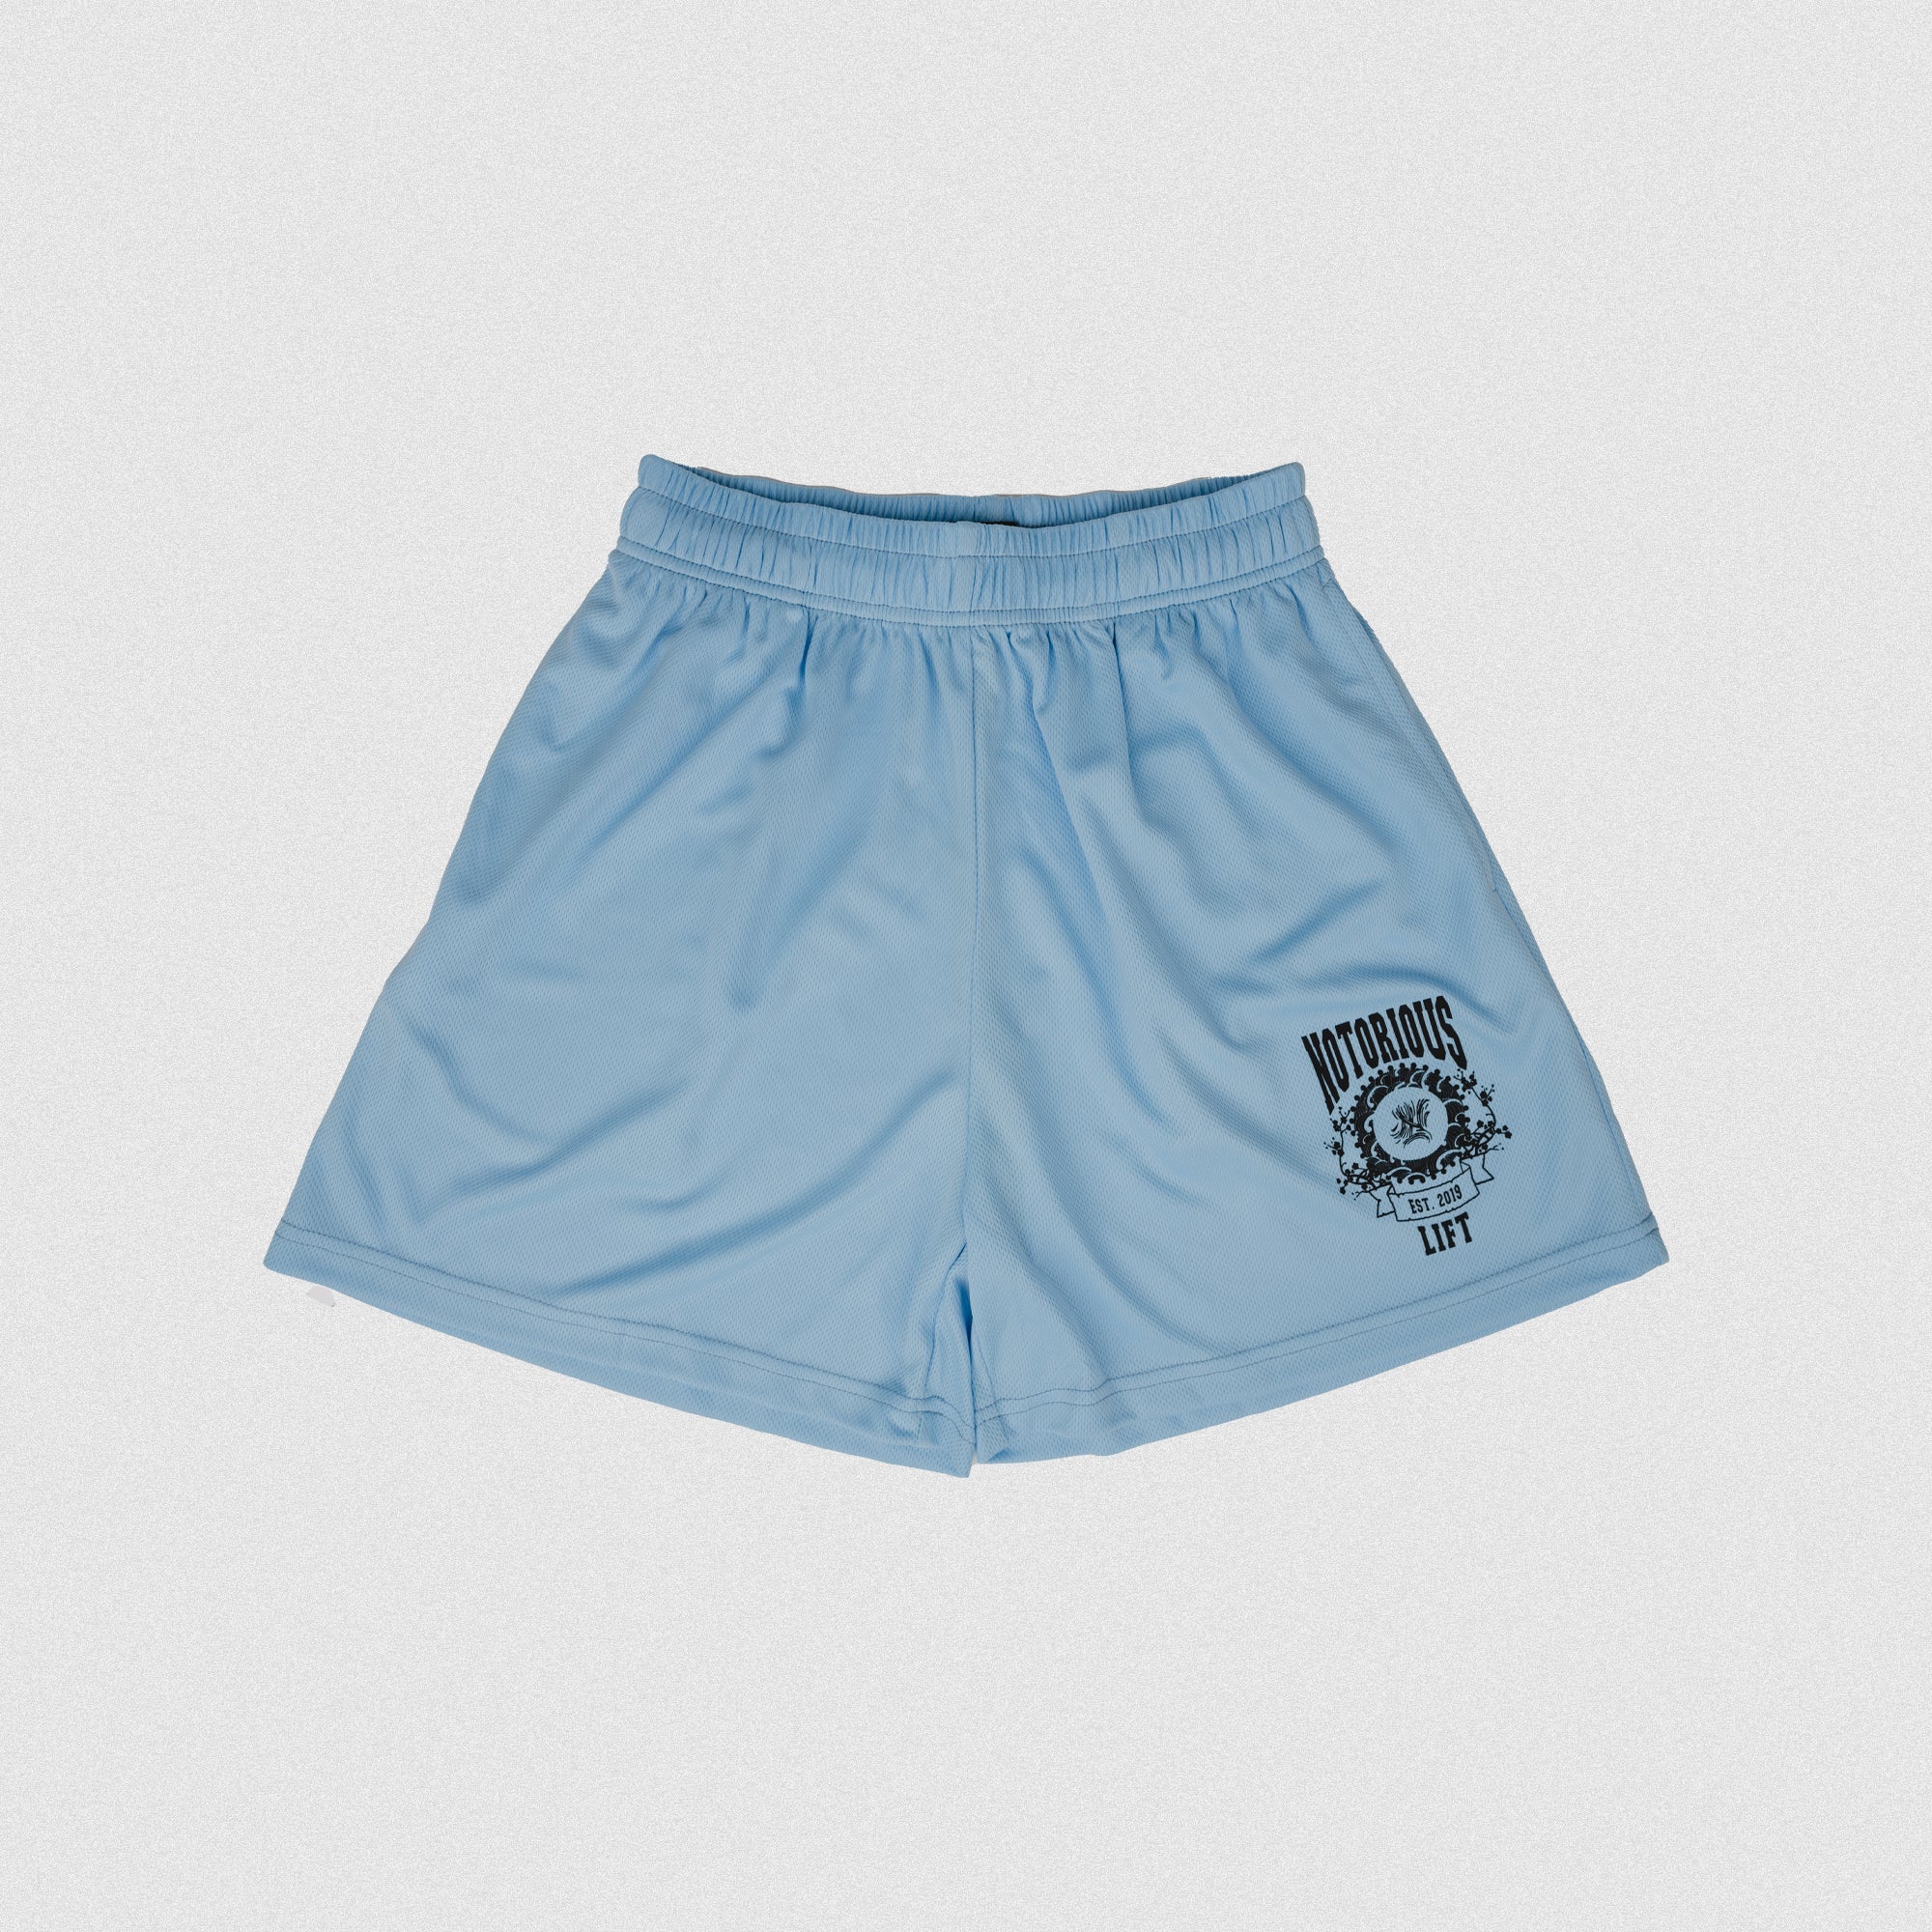 LIMITED EDITION VARSITY MESH SHORTS COOL BLUE – Notorious Lift